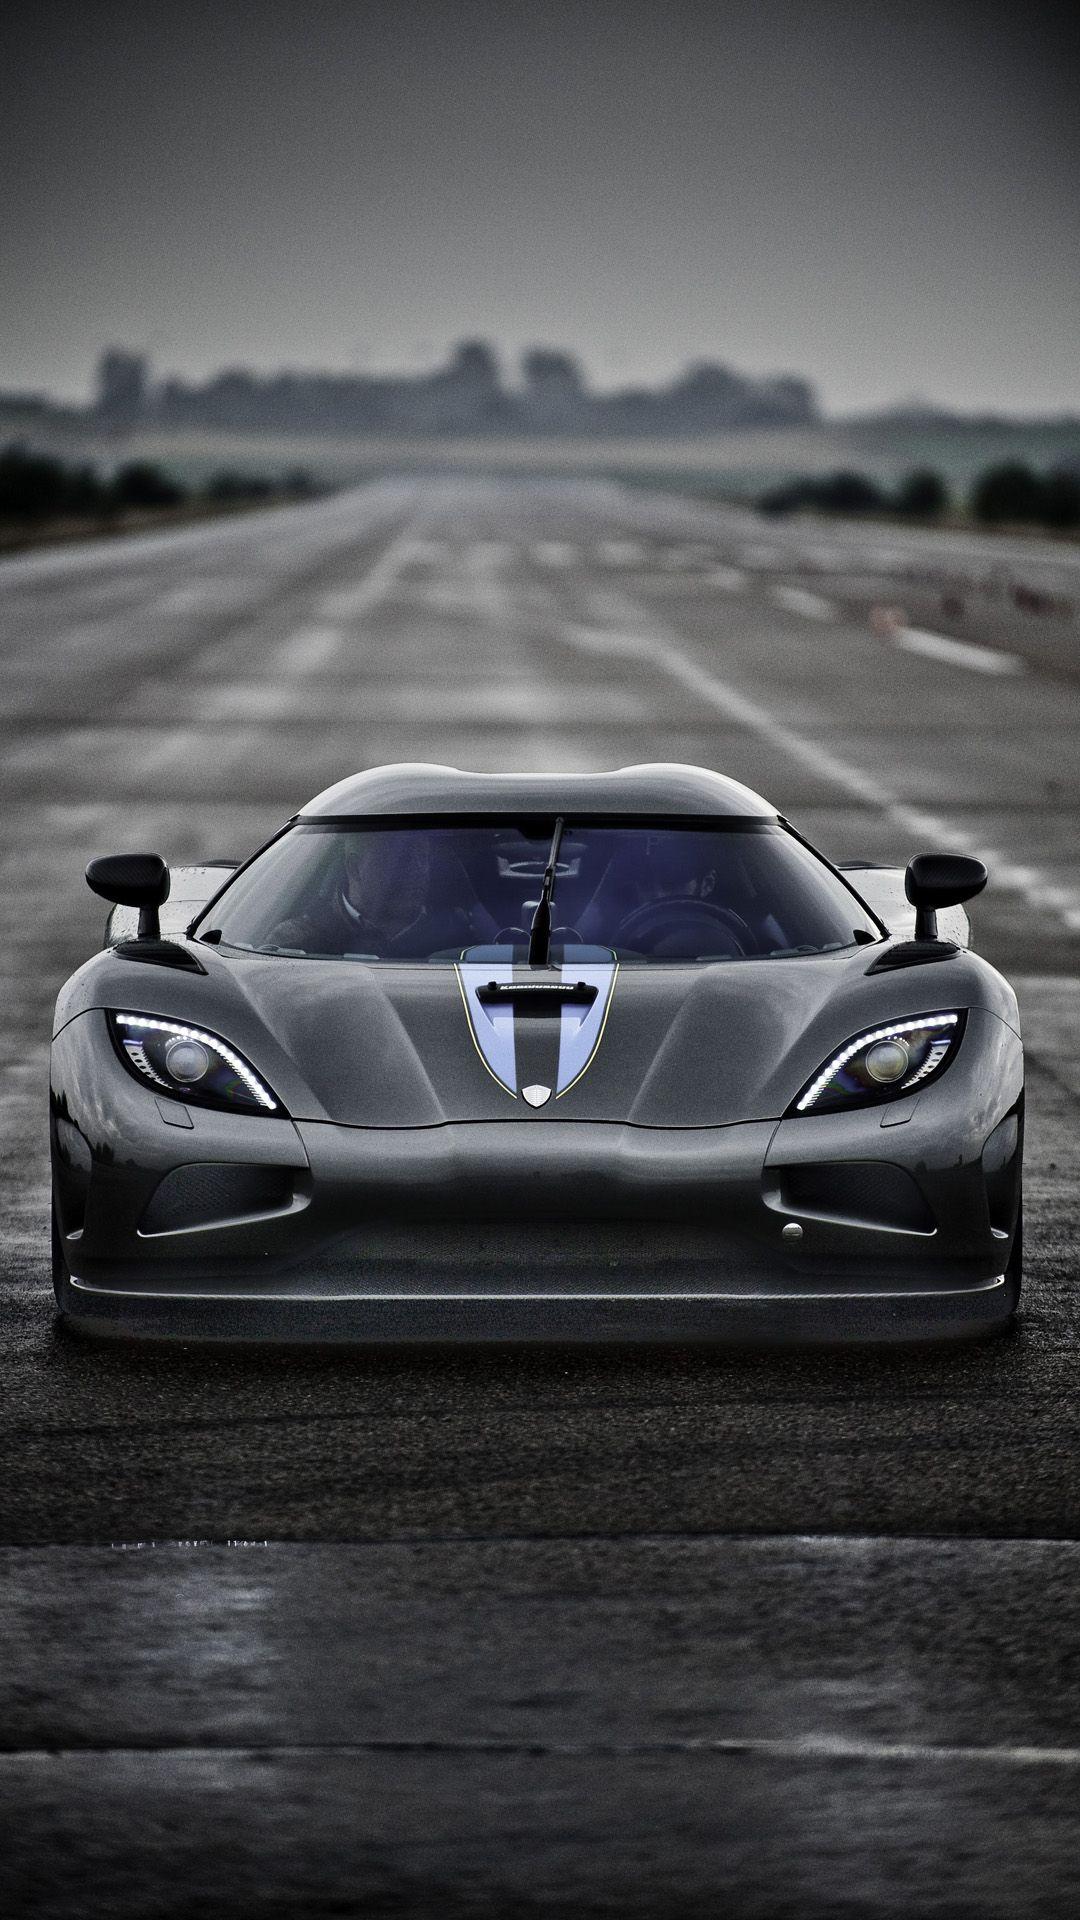 Koenigsegg Agera htc one wallpaper, free and easy to download